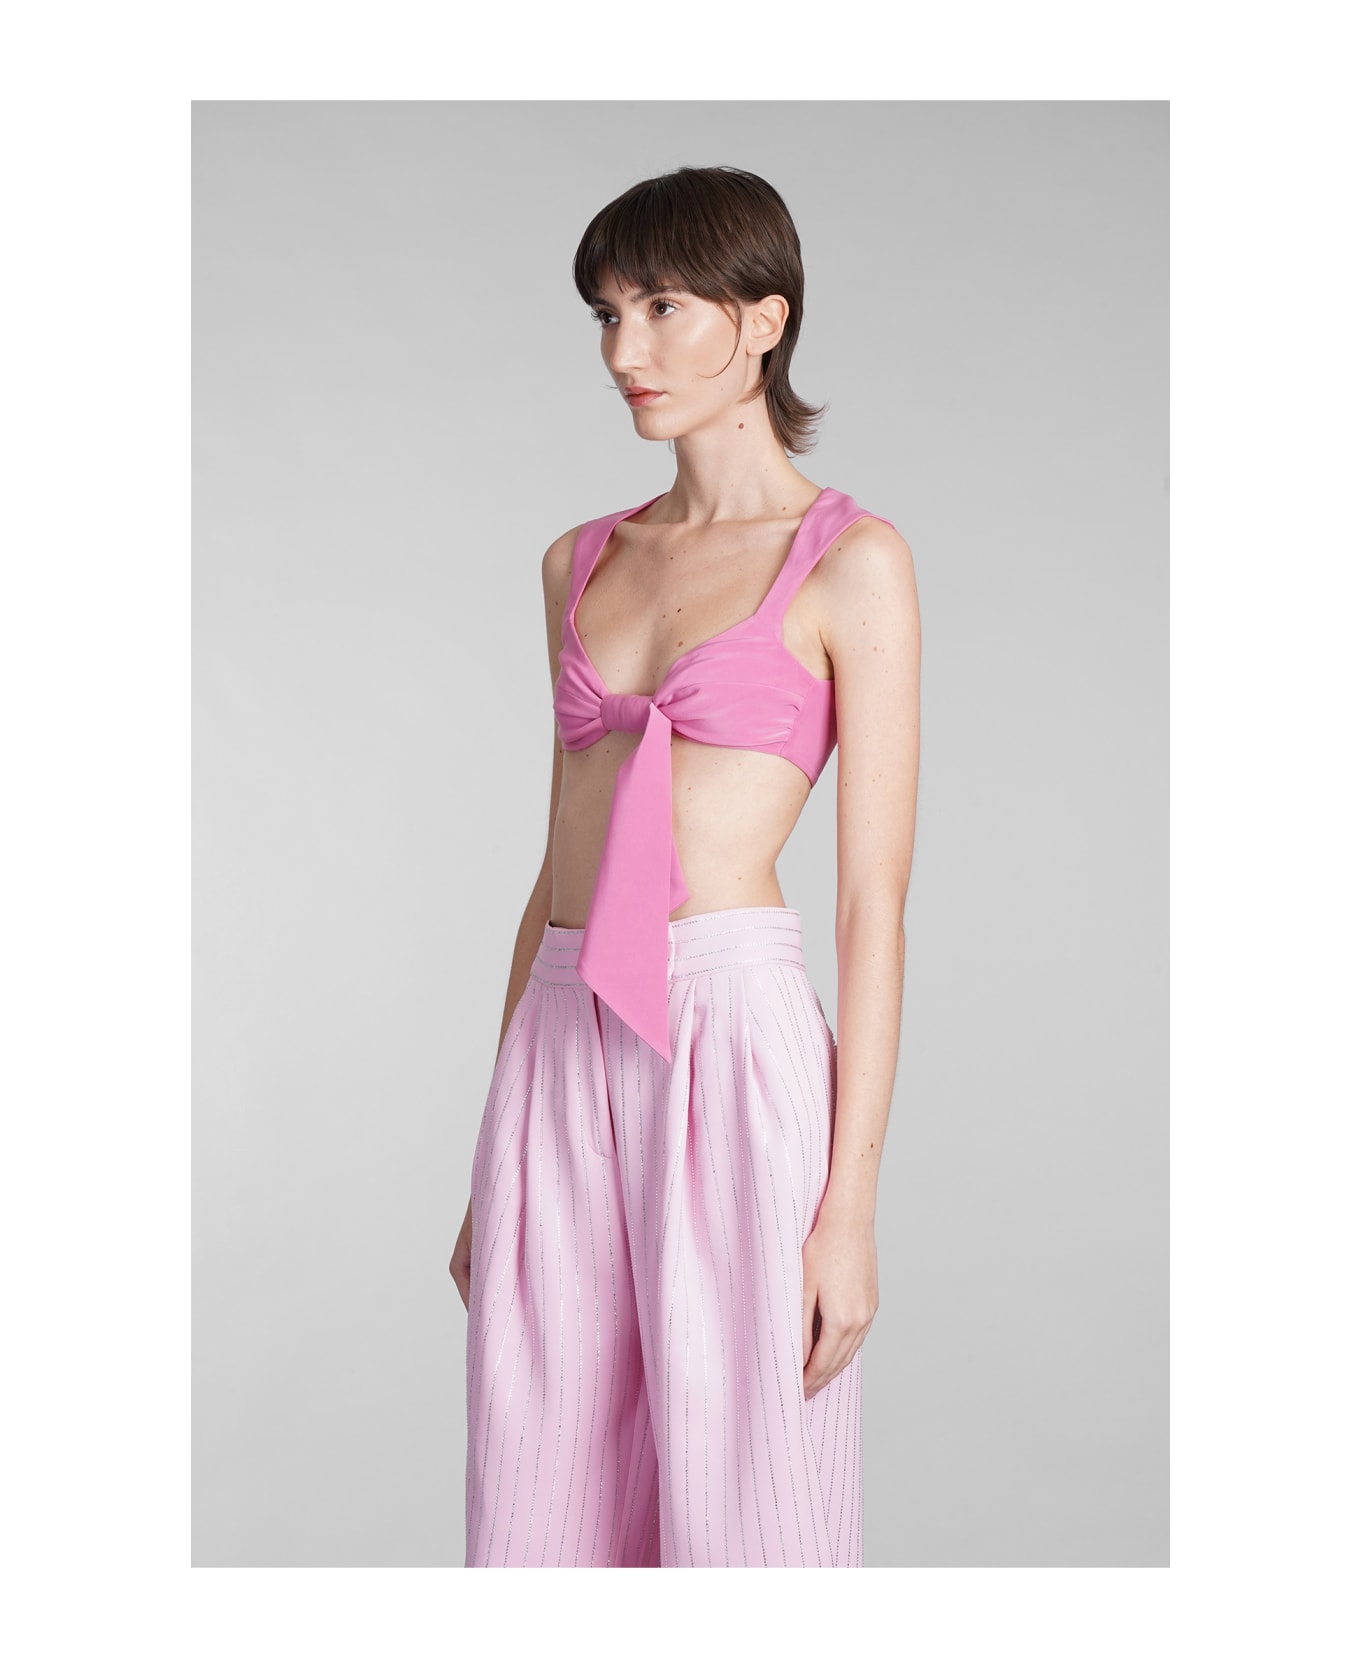 The Attico 'stacy' Top - Pink